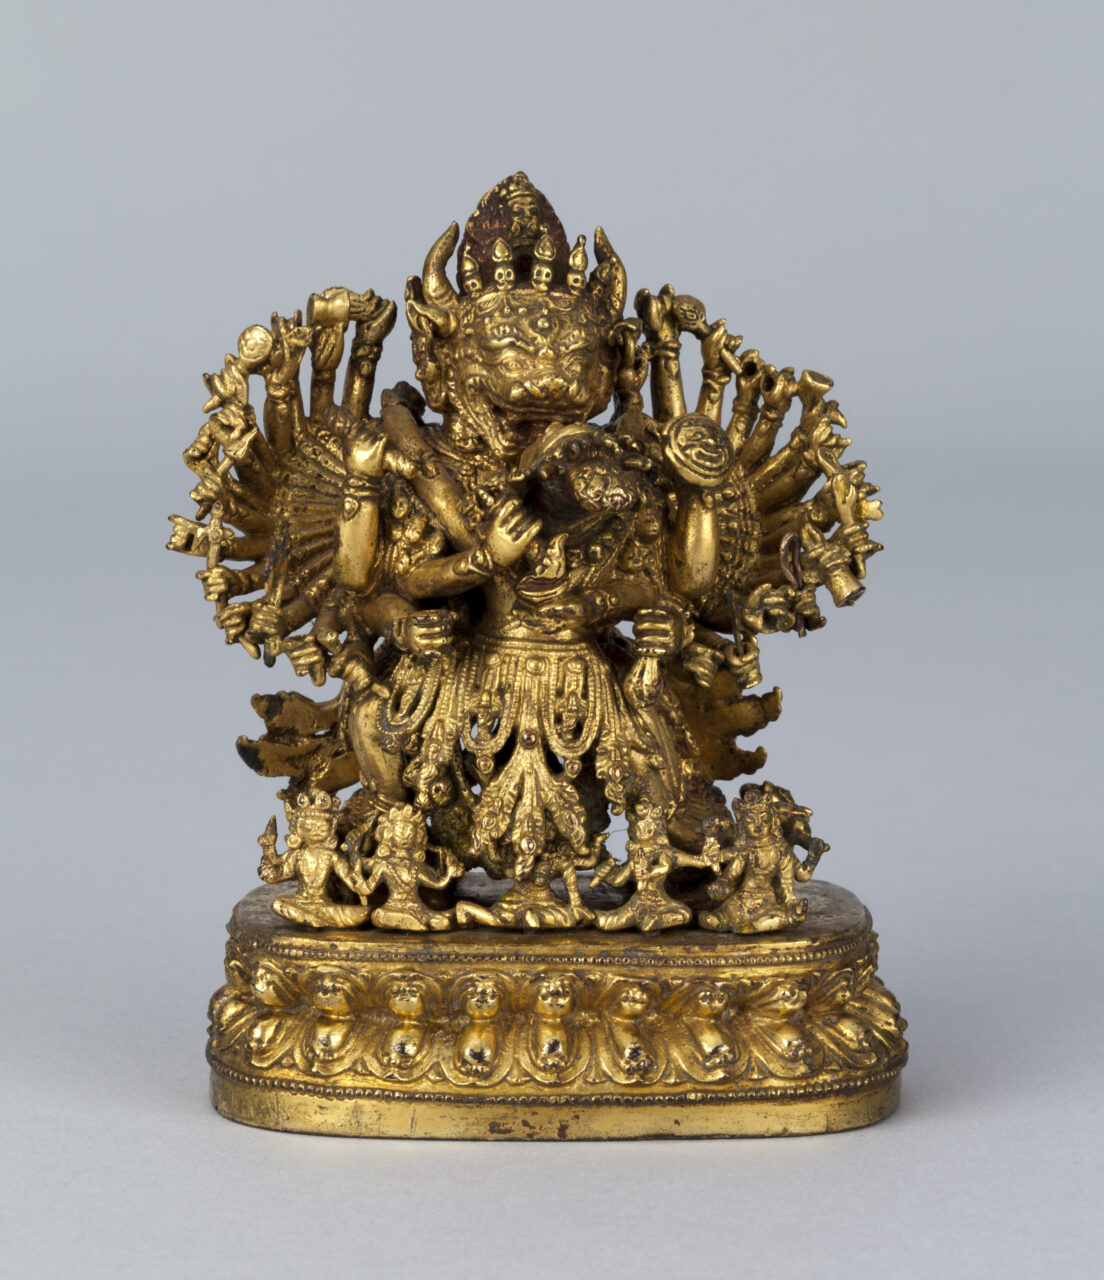 Golden sculpture depicting cow-headed, many-armed deity in embrace with consort surrounded by circle of deities